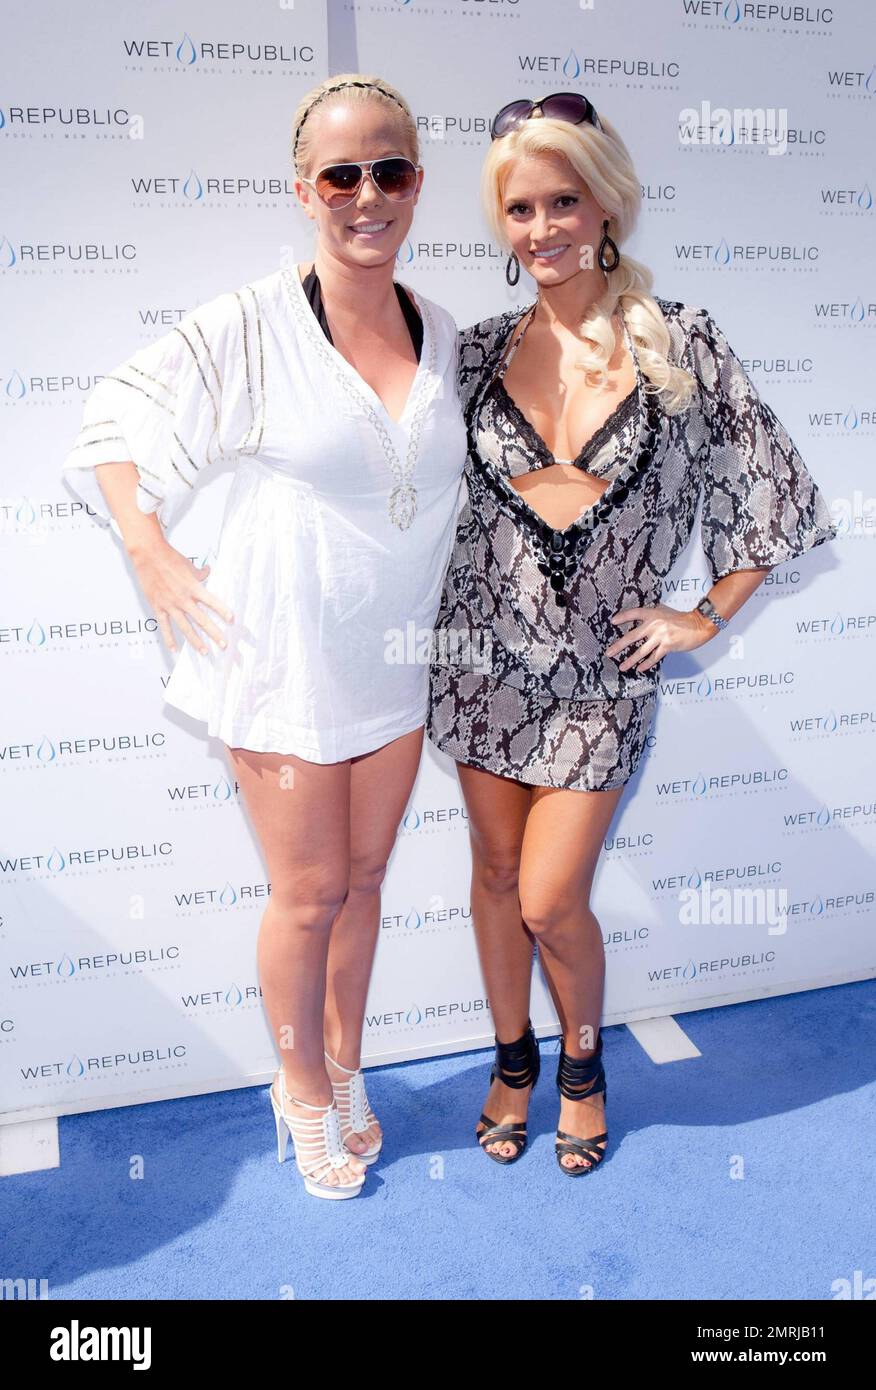 Kendra Wilkinson hosts Ab Cuts Spring Break pool party at WET REPUBLIC at  MGM Grand Resort in Las Vegas, NV on March 26, 2011 Stock Photo - Alamy